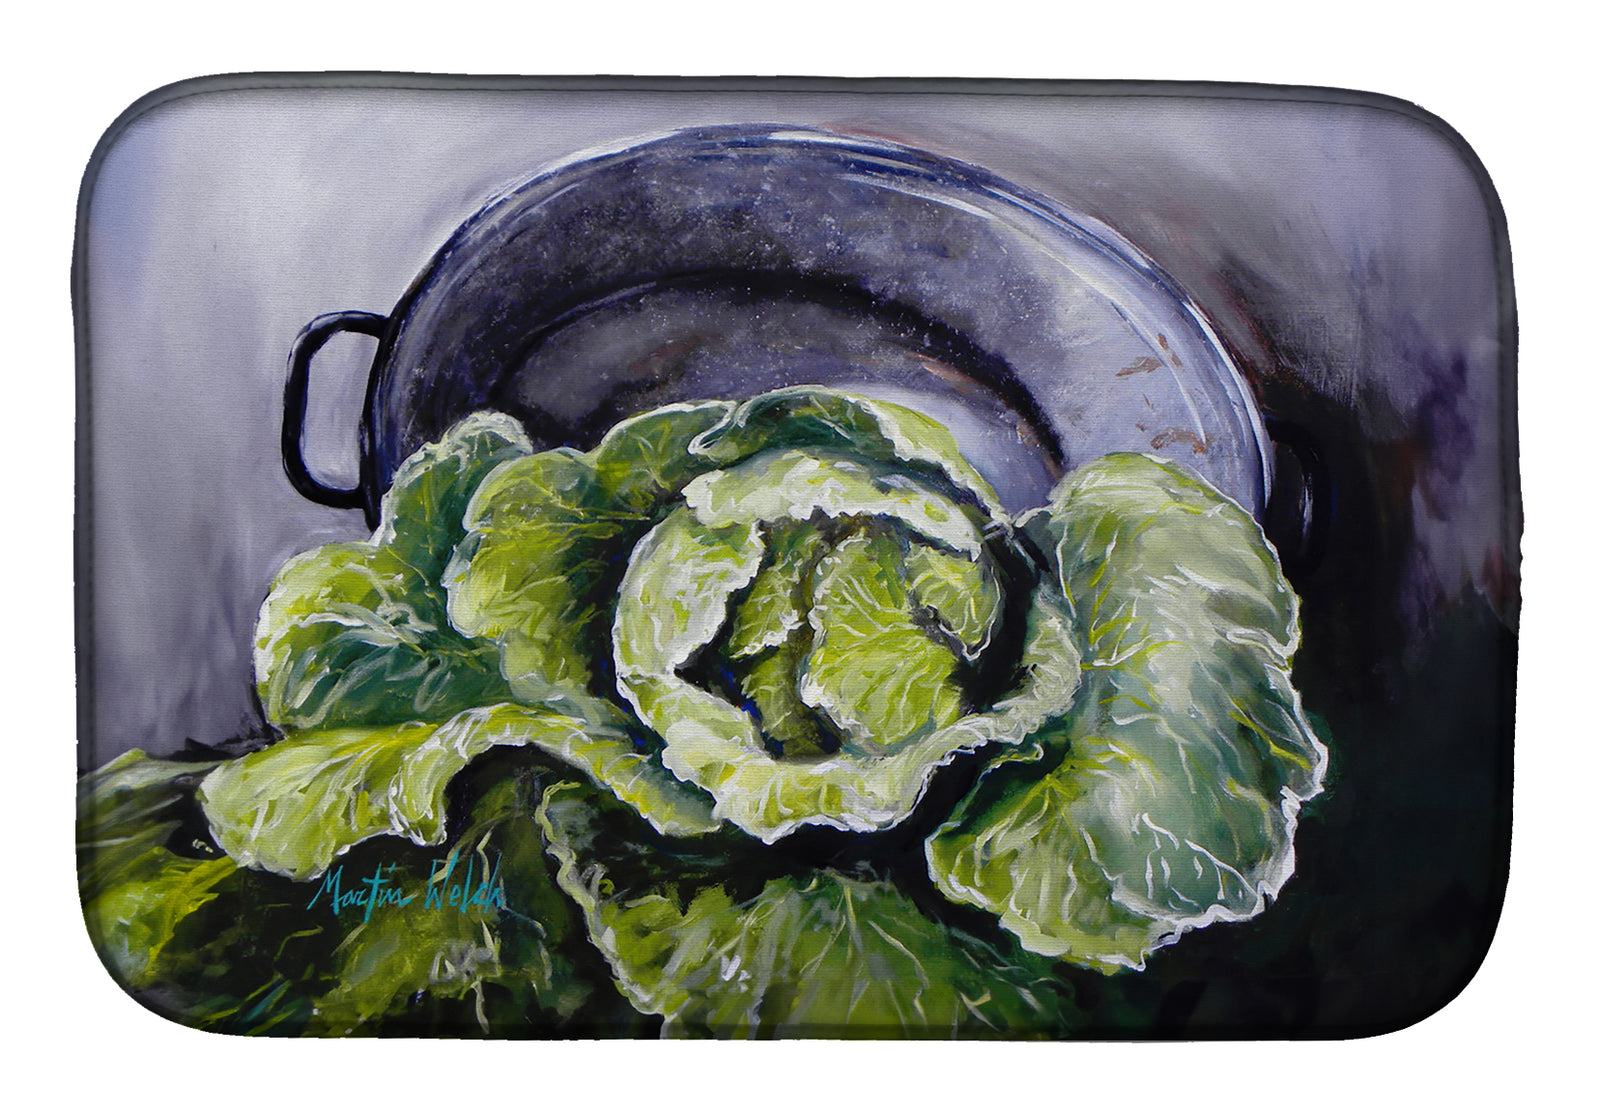 Buy this Home Grown In Plaquemines Parish Cabbage Dish Drying Mat